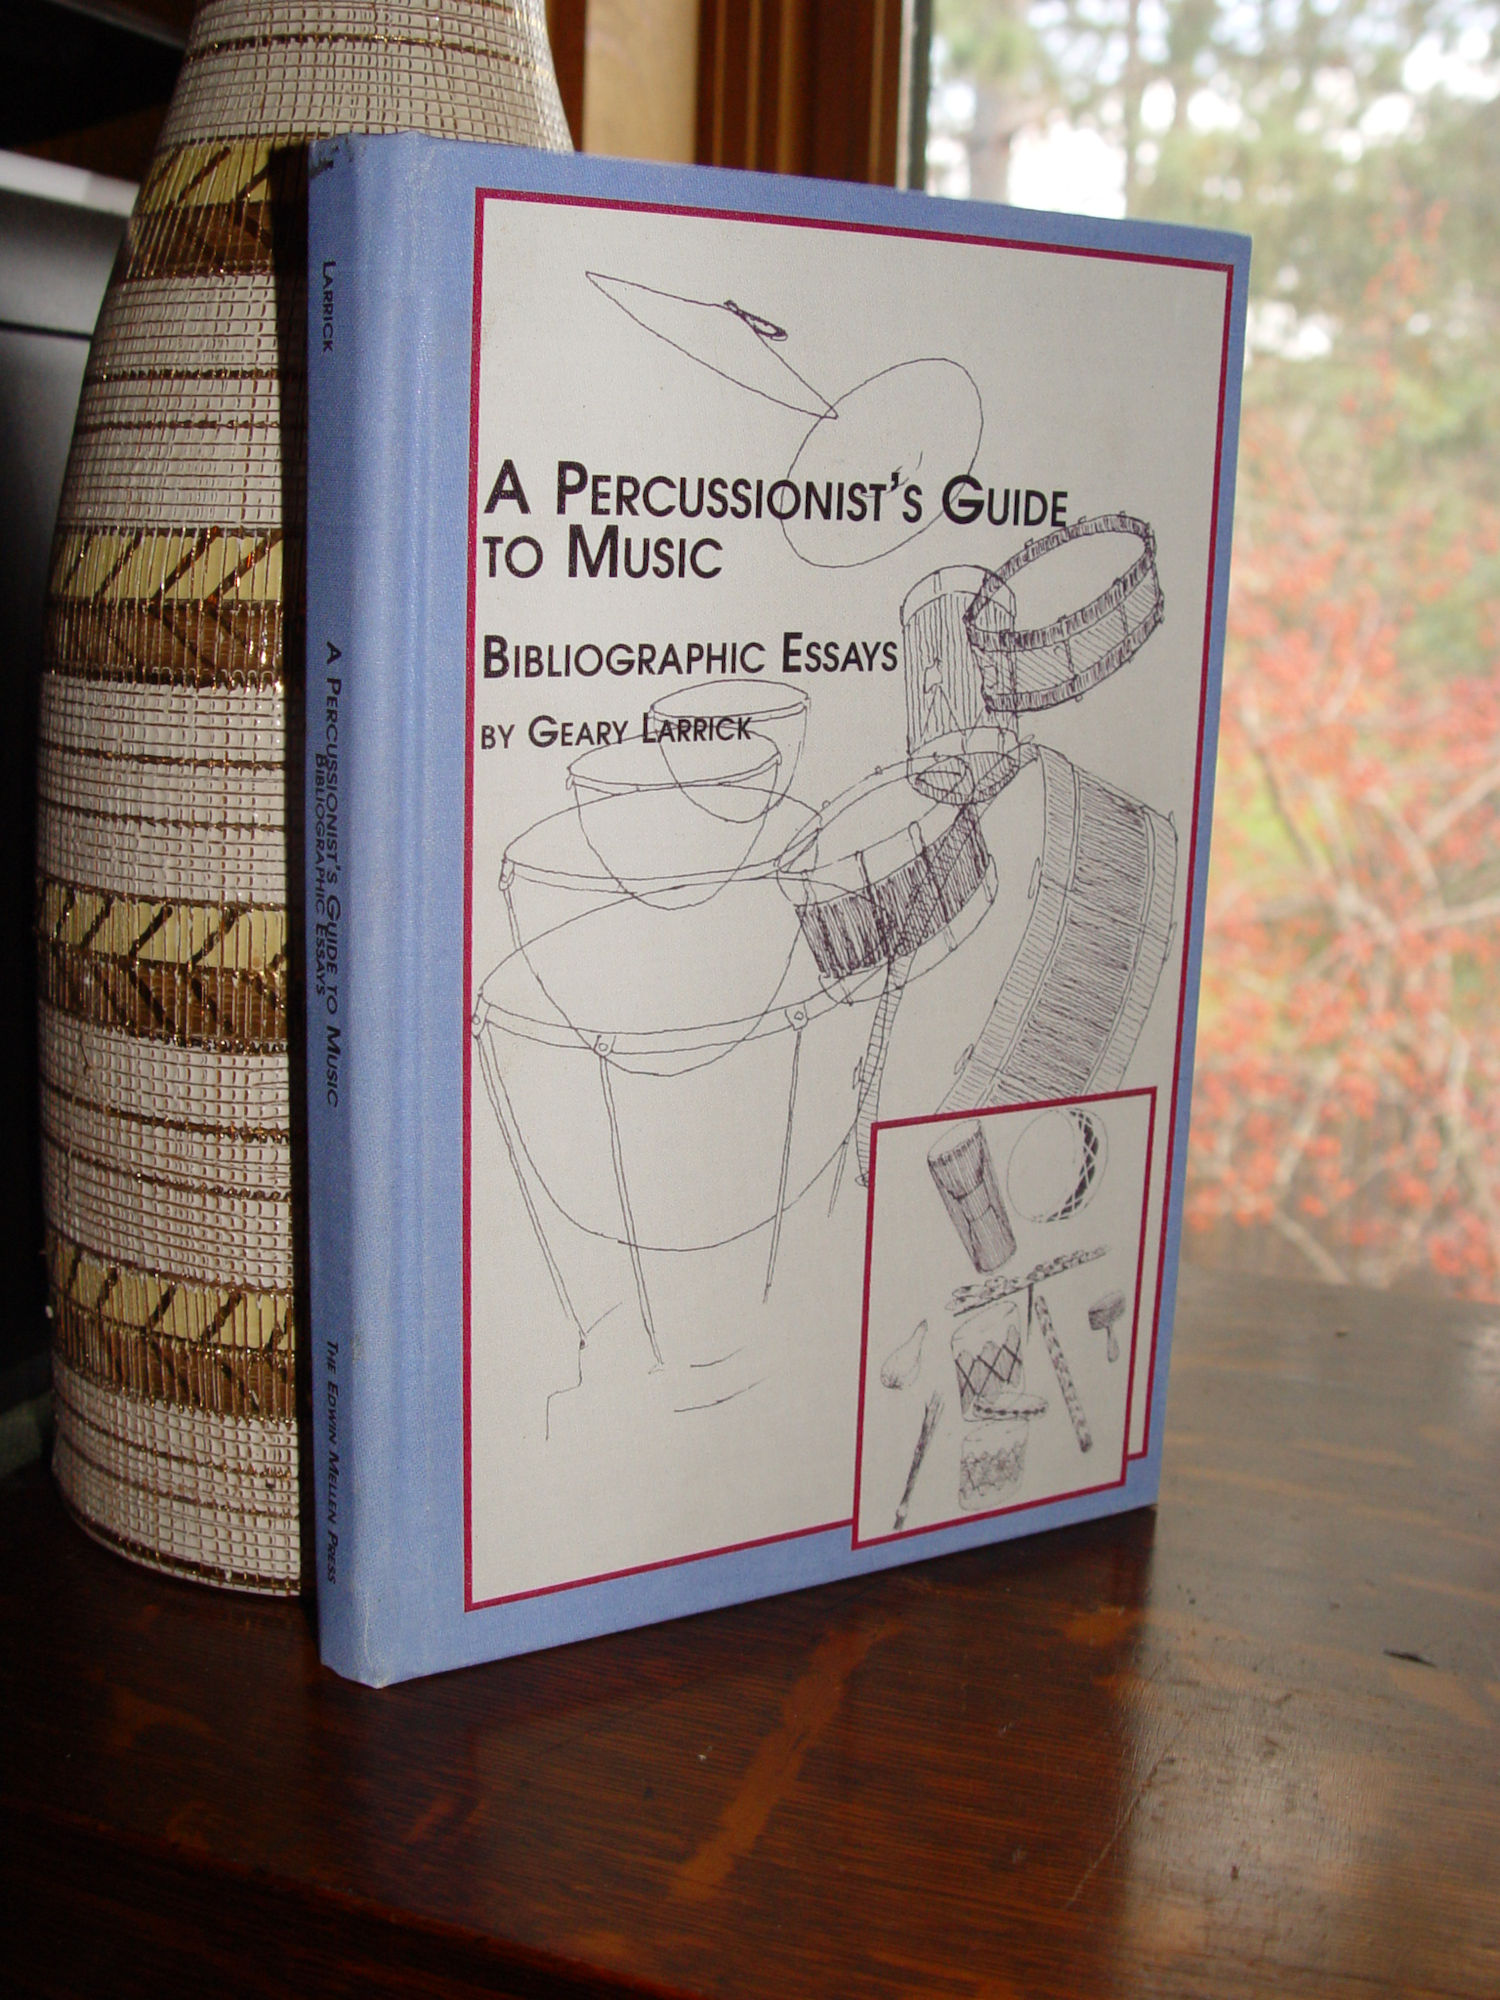 A Percussionist's Guide to Music:
                        Bibliographic Essays 2002 by Geary Larrick